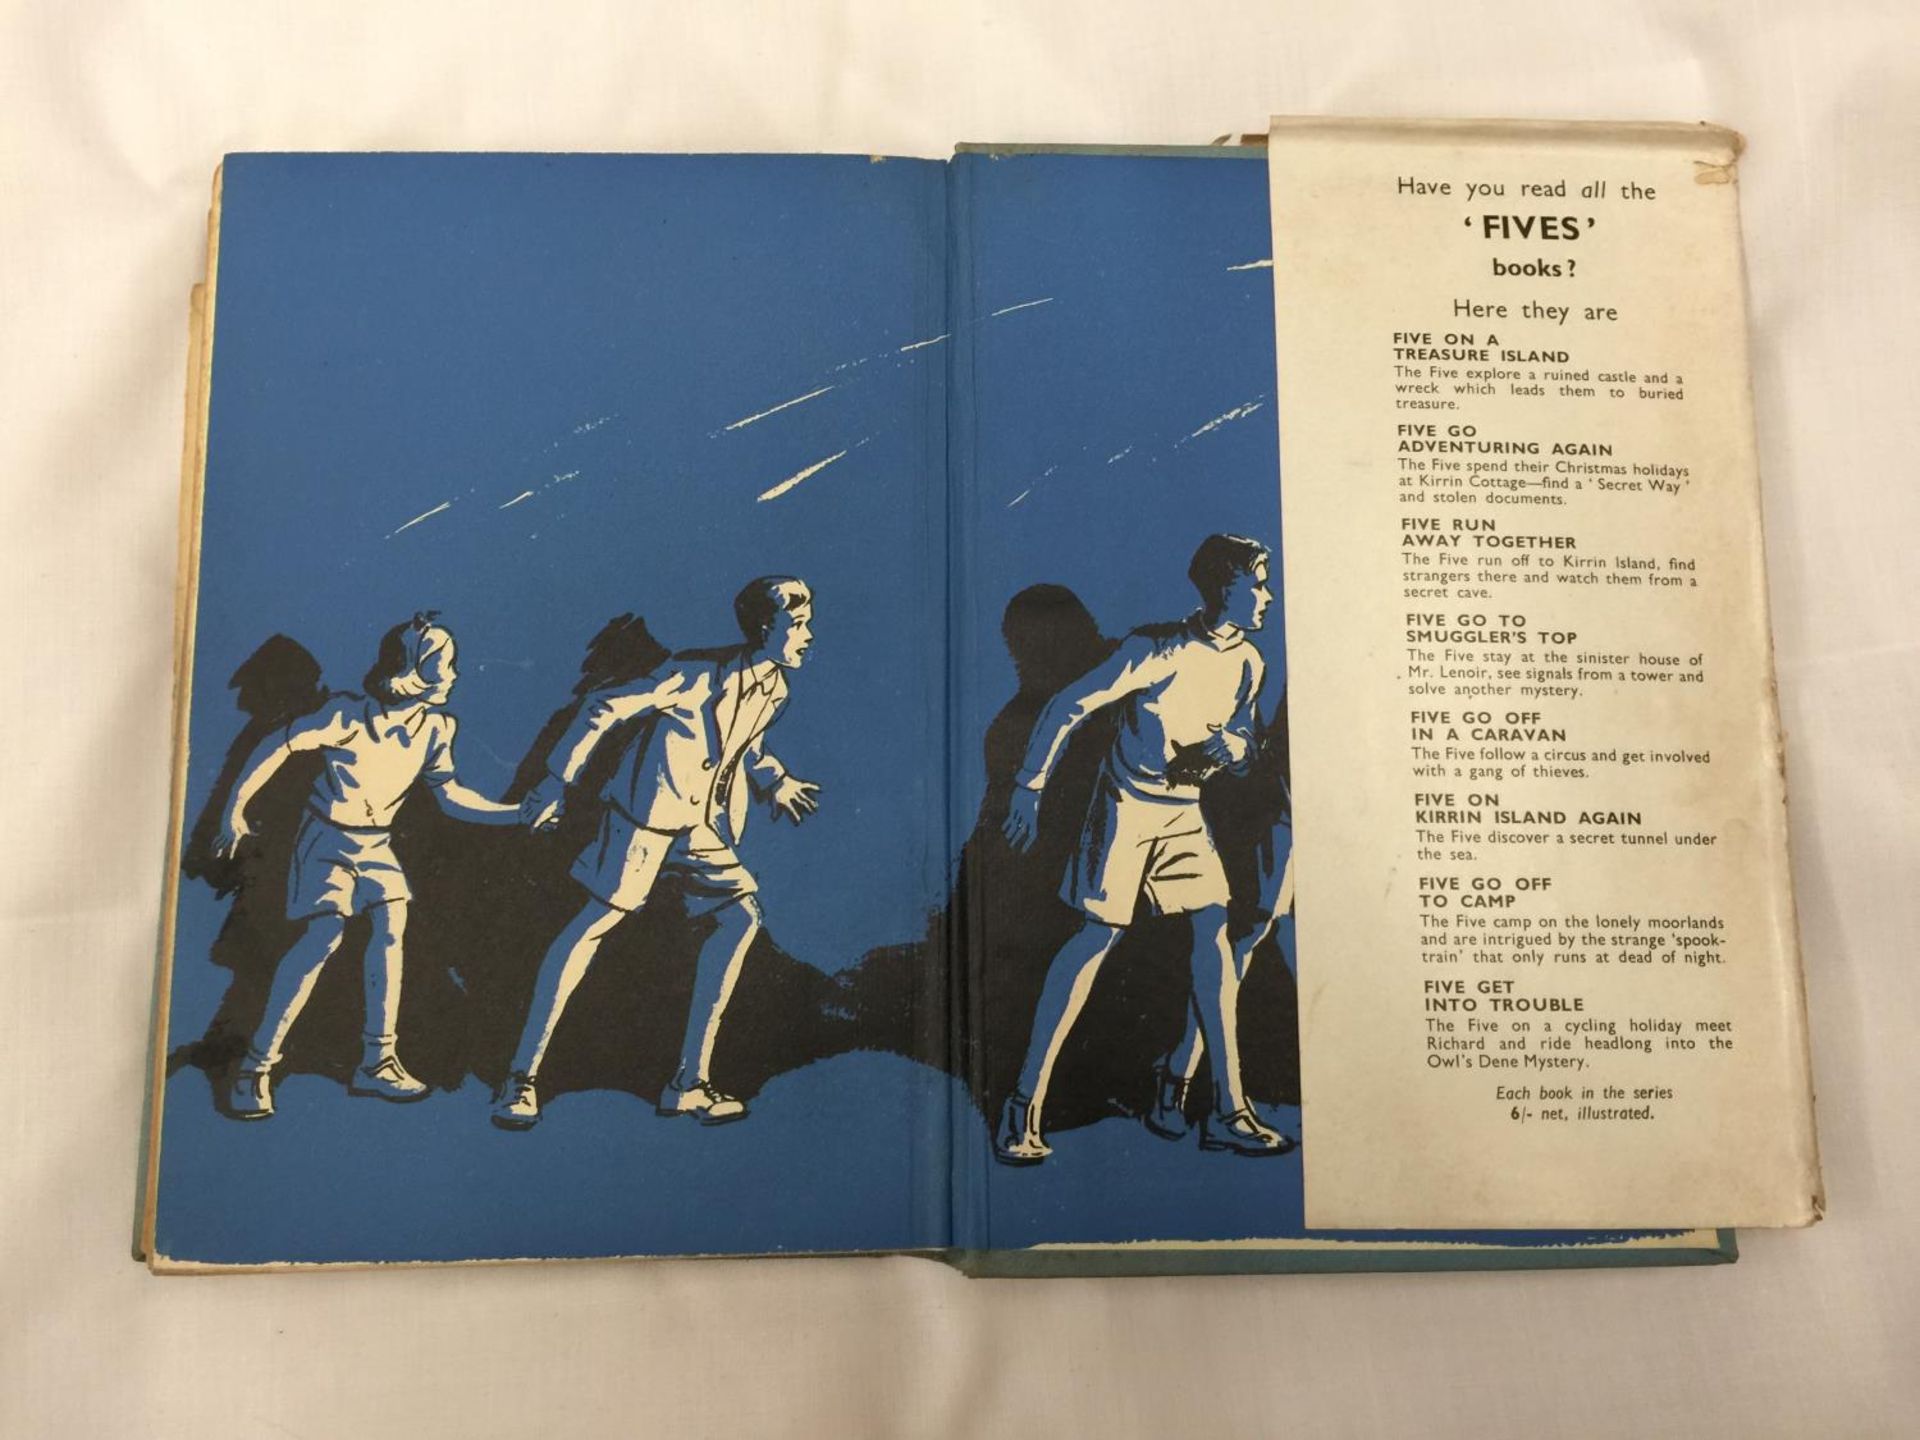 A FIRST EDITION (THIRD IMPRESSION) FIVE RUN AWAY TOGETHER HARDBACK WITH DUST JACKET BY ENID BLYTON - - Image 6 of 10